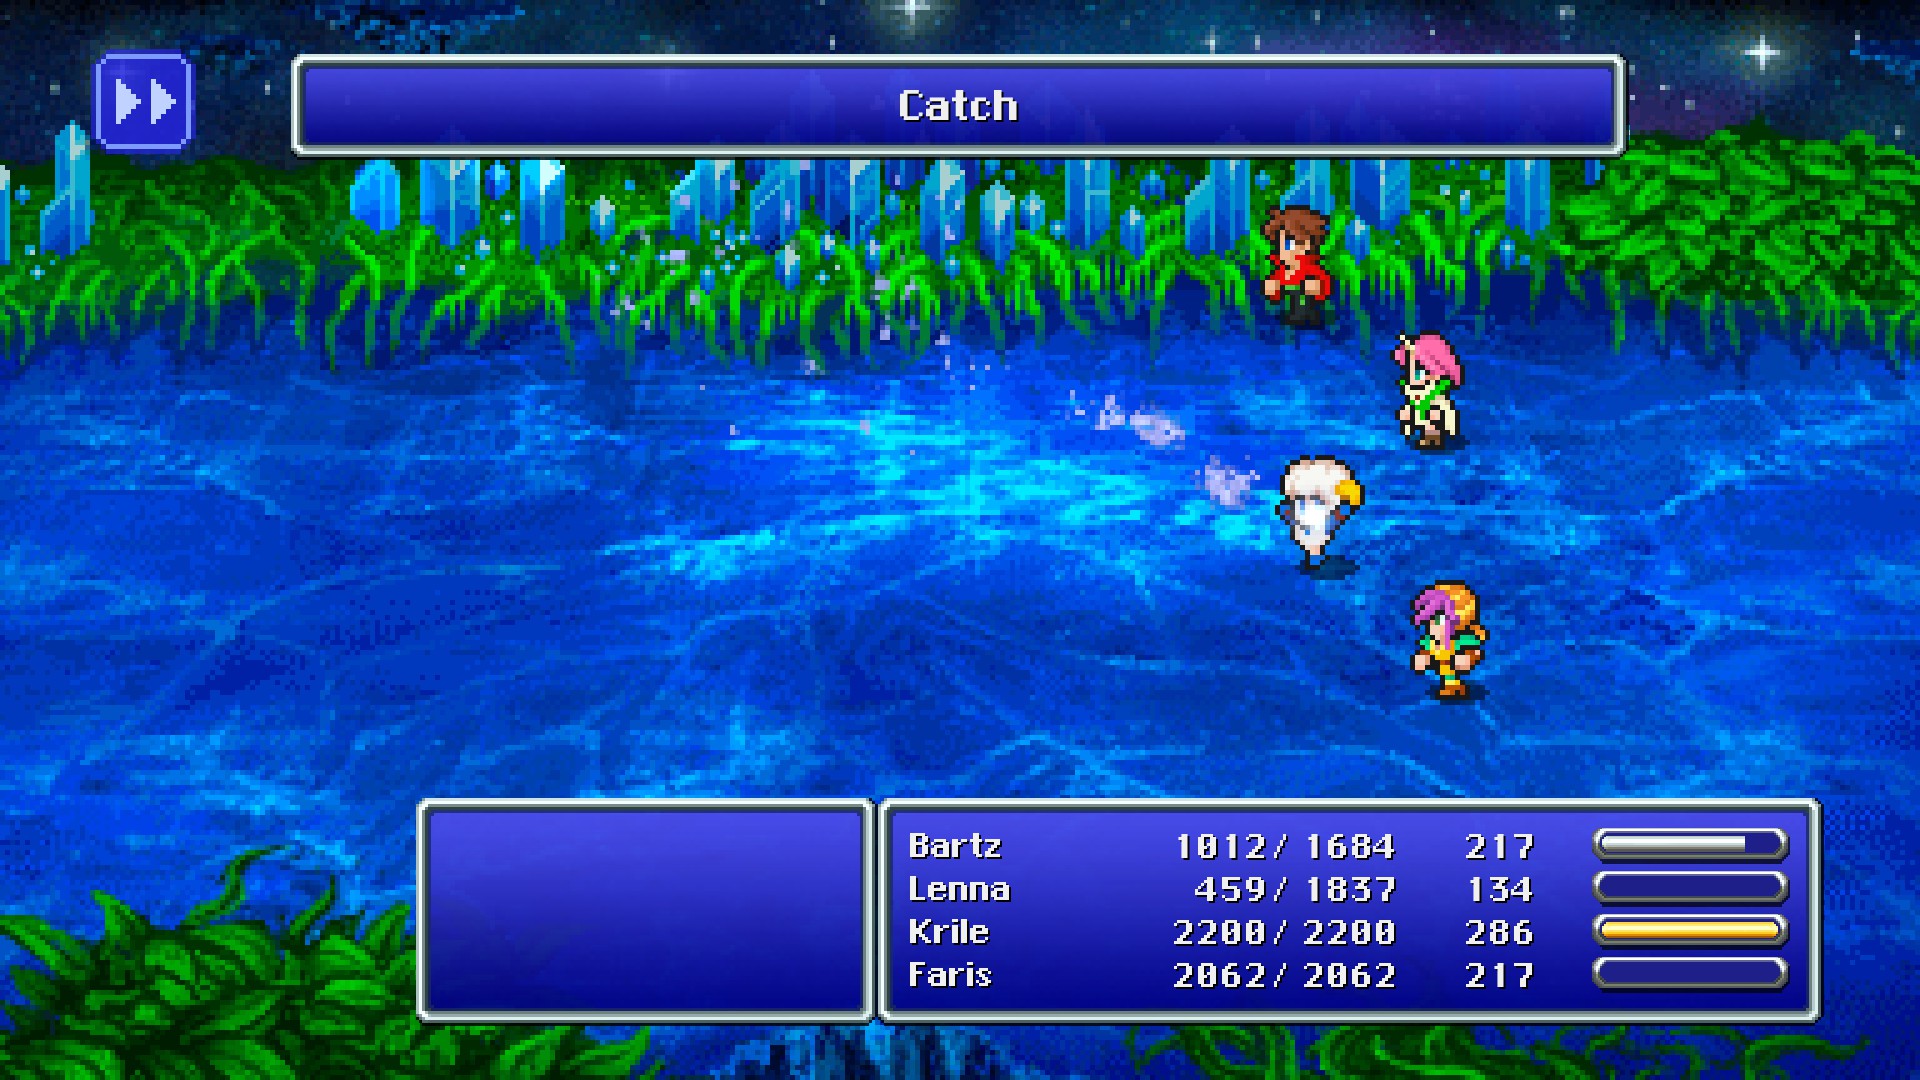 https://static.wikia.nocookie.net/finalfantasy/images/7/71/Catch_from_FFV_Pixel_Remaster.jpg/revision/latest?cb=20211230072751